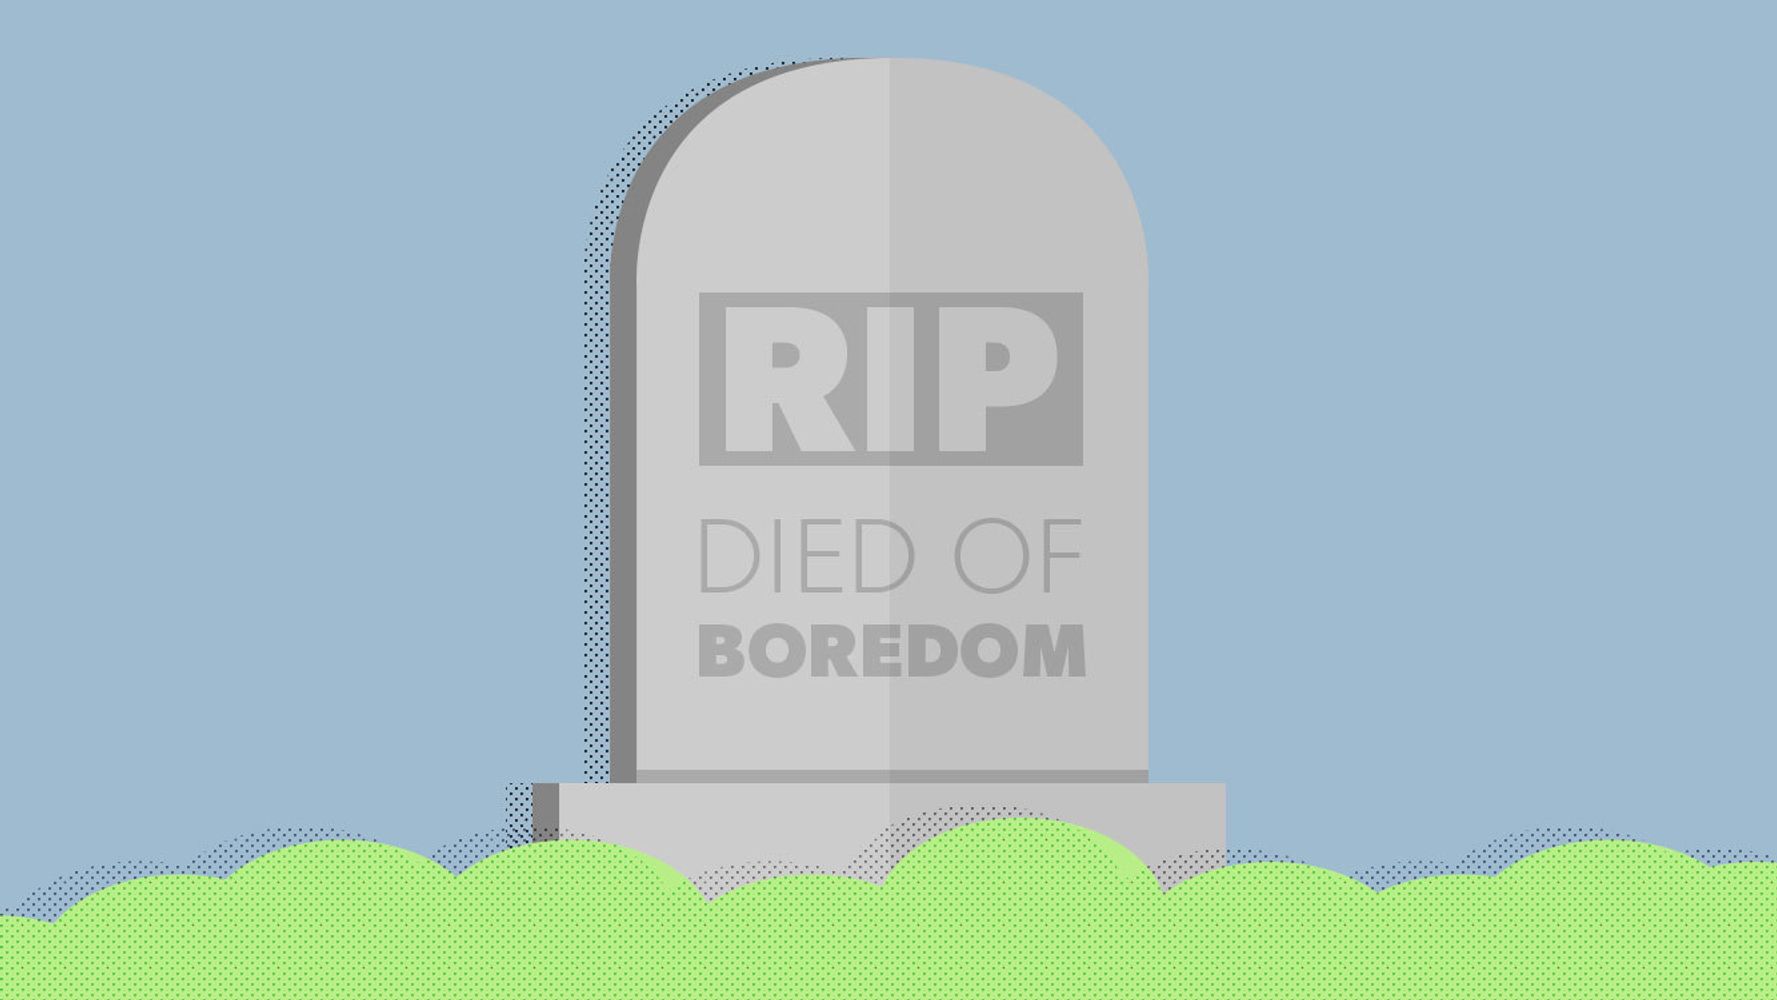 Top 15+ Cool Websites to Cure Boredom